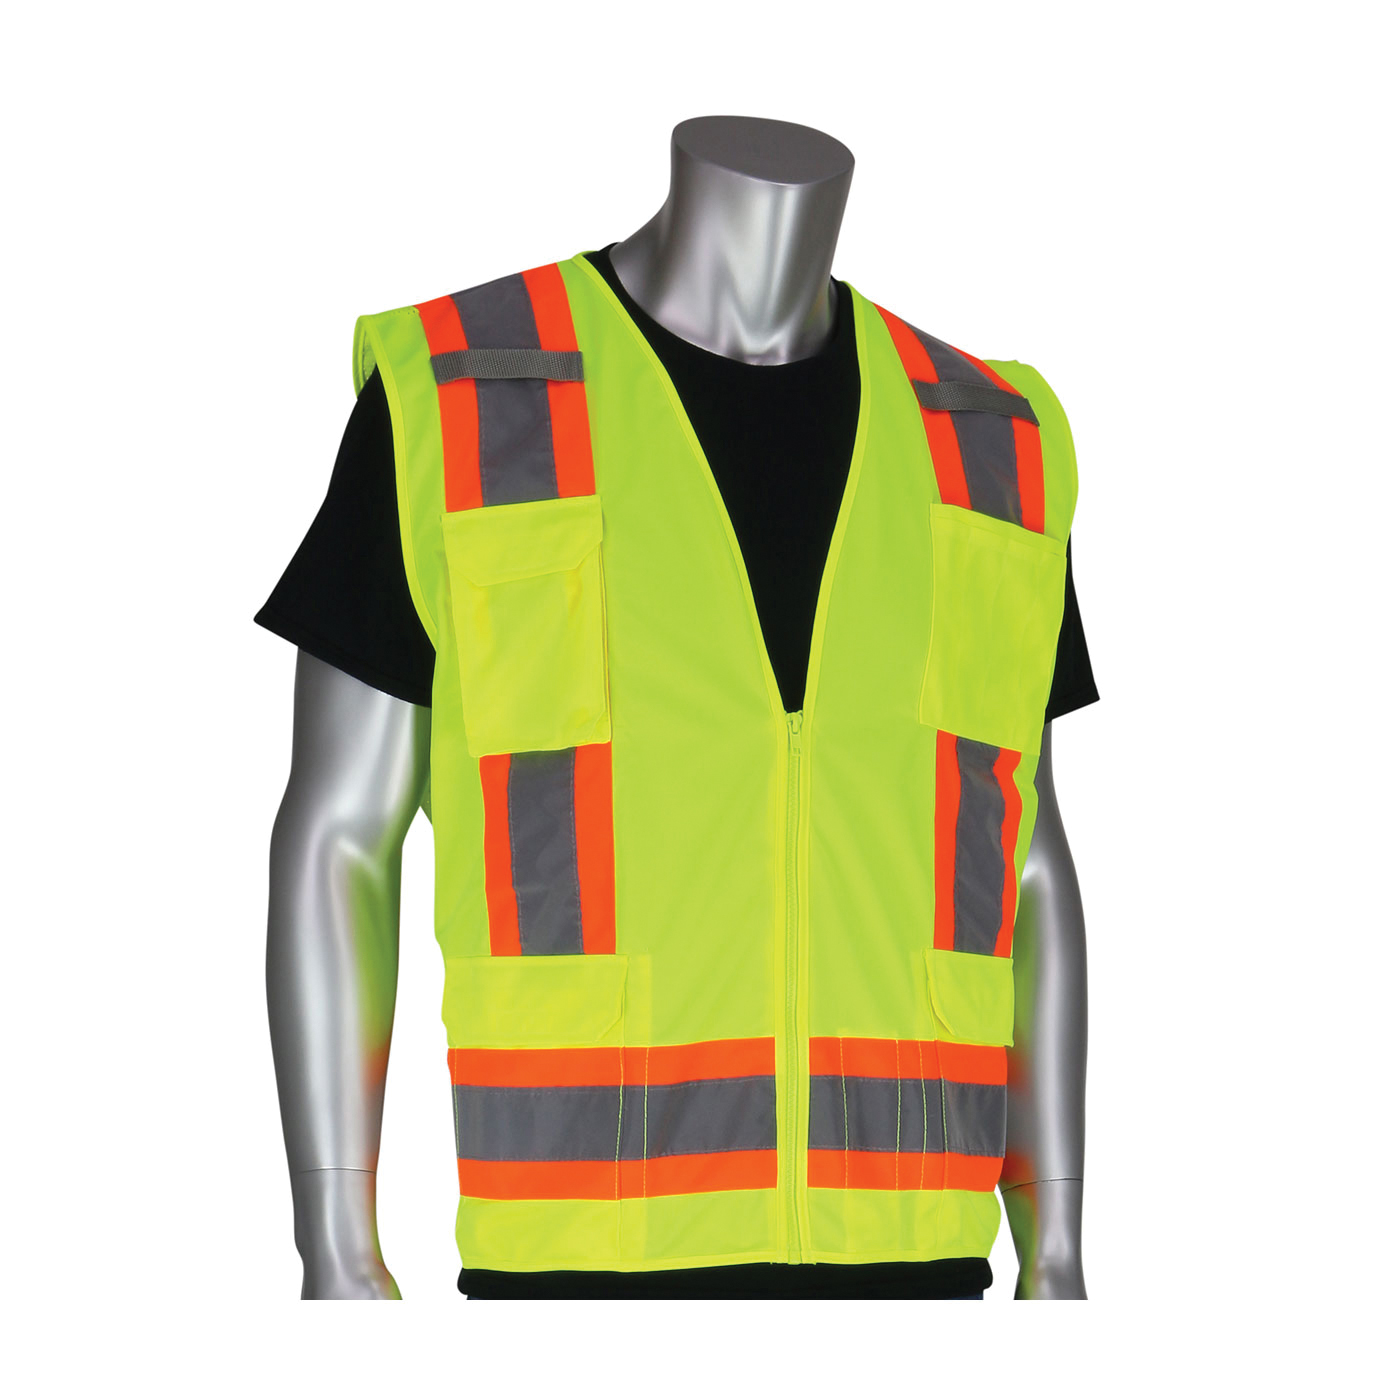 PIP® 302-0500S-YEL/L 2-Tone Surveyor Safety Vest, L, Hi-Viz Lime Yellow, Polyester/Solid Tricot, Zipper Closure, 11 Pockets, ANSI Class: Class 2, Specifications Met: ANSI 107 Type R